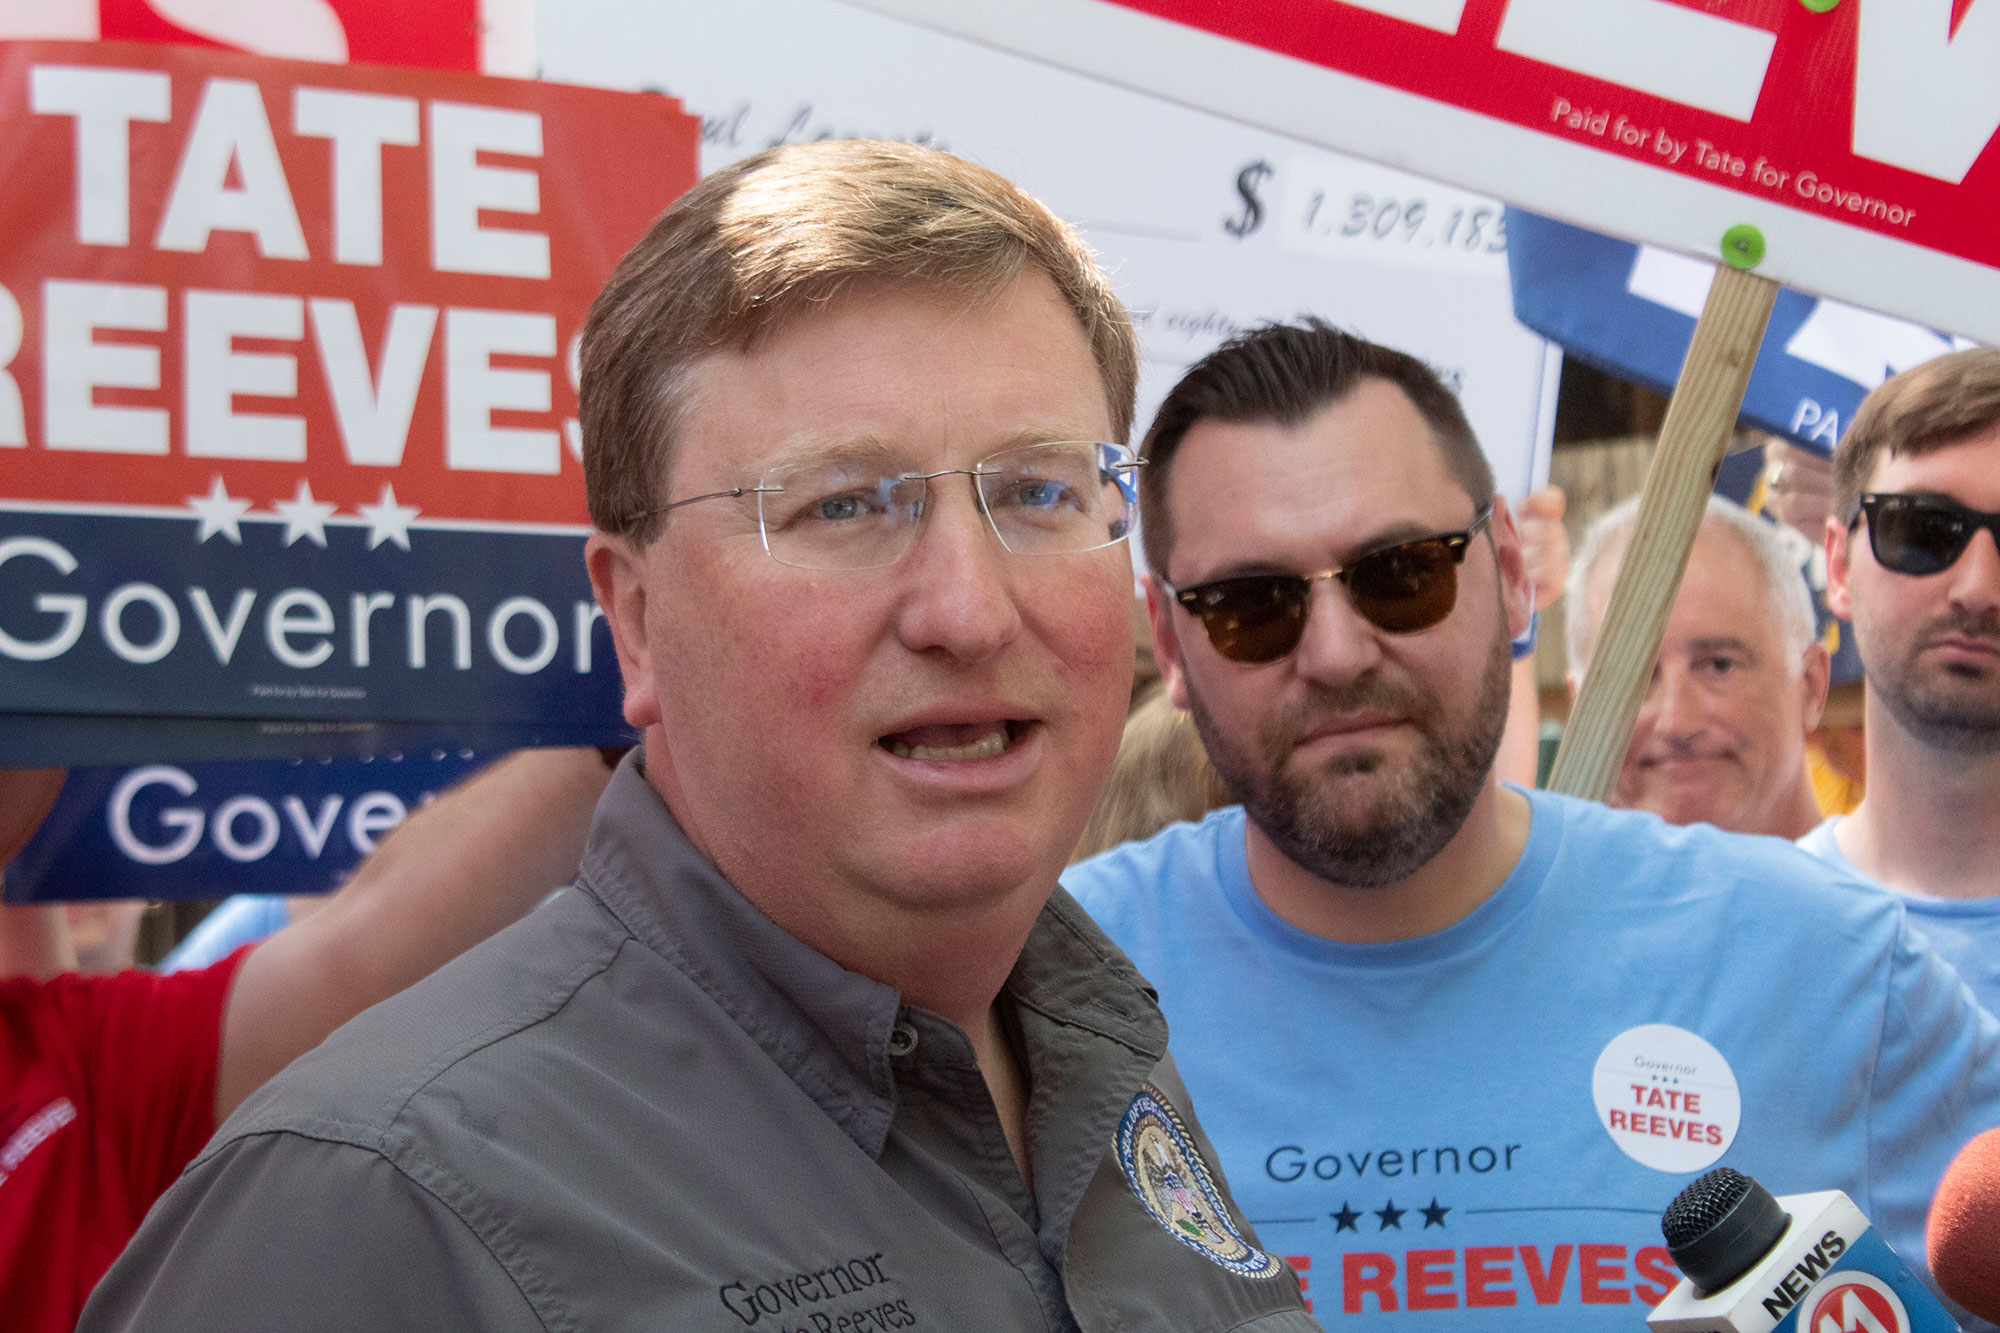 Tate Reeves speaking at a rally, as people hold signs with his name on it behind him